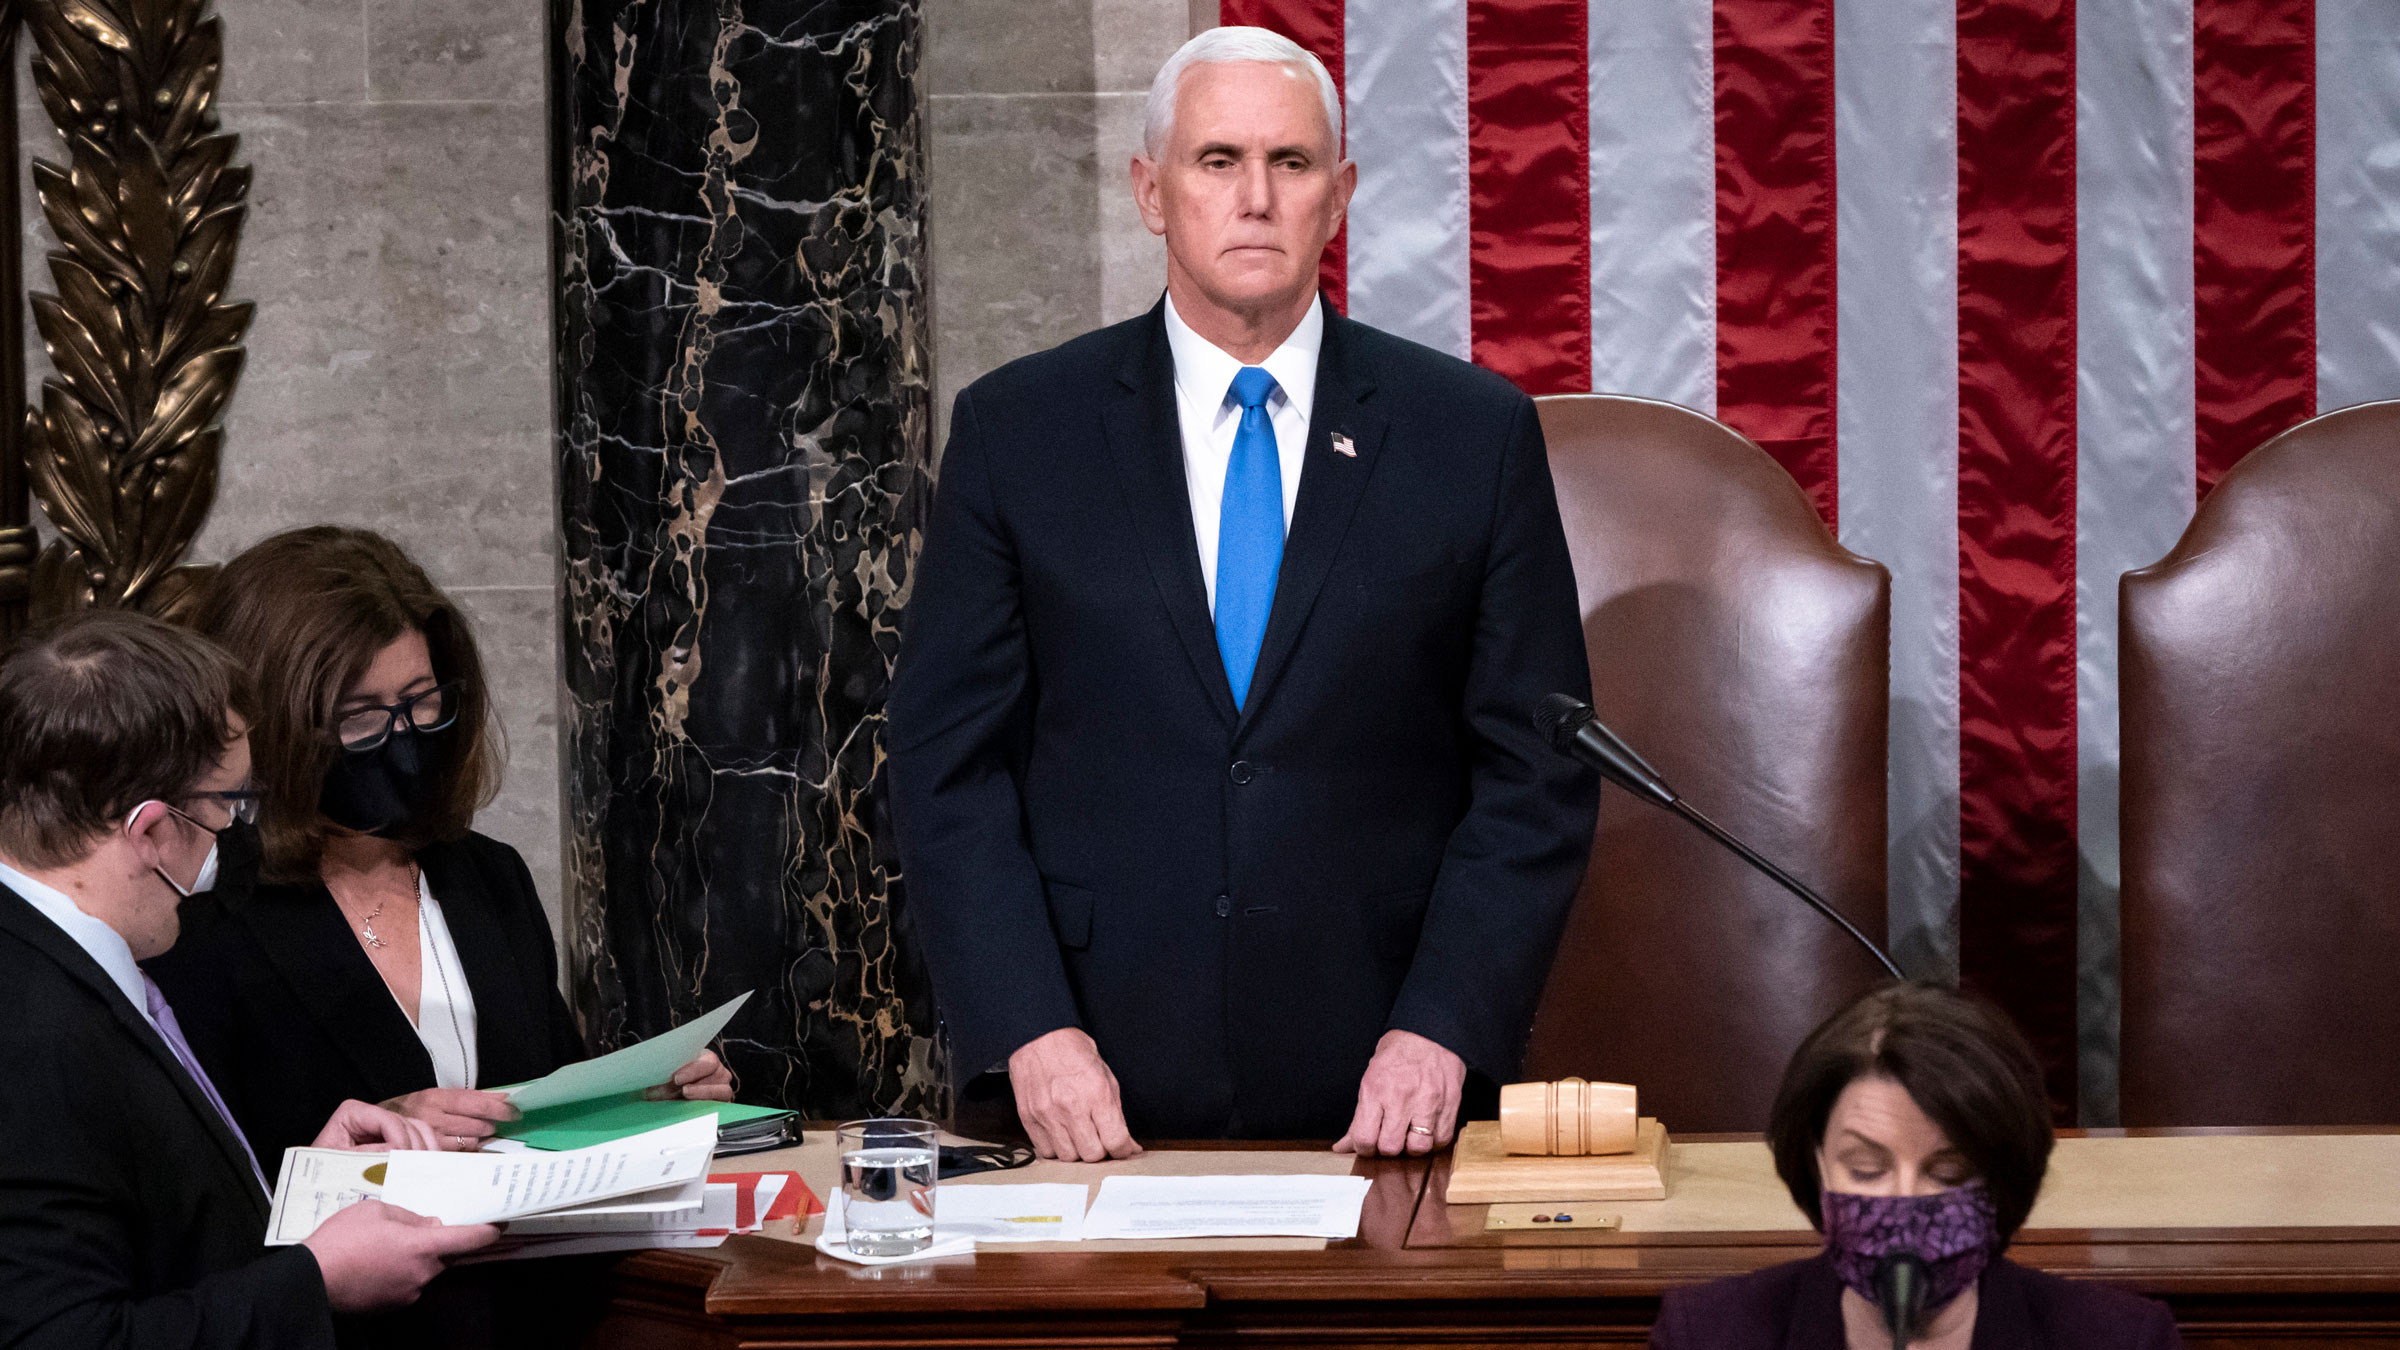 Vice President Mike Pence returns to the House chamber after the January 6 riot at the Capitol.